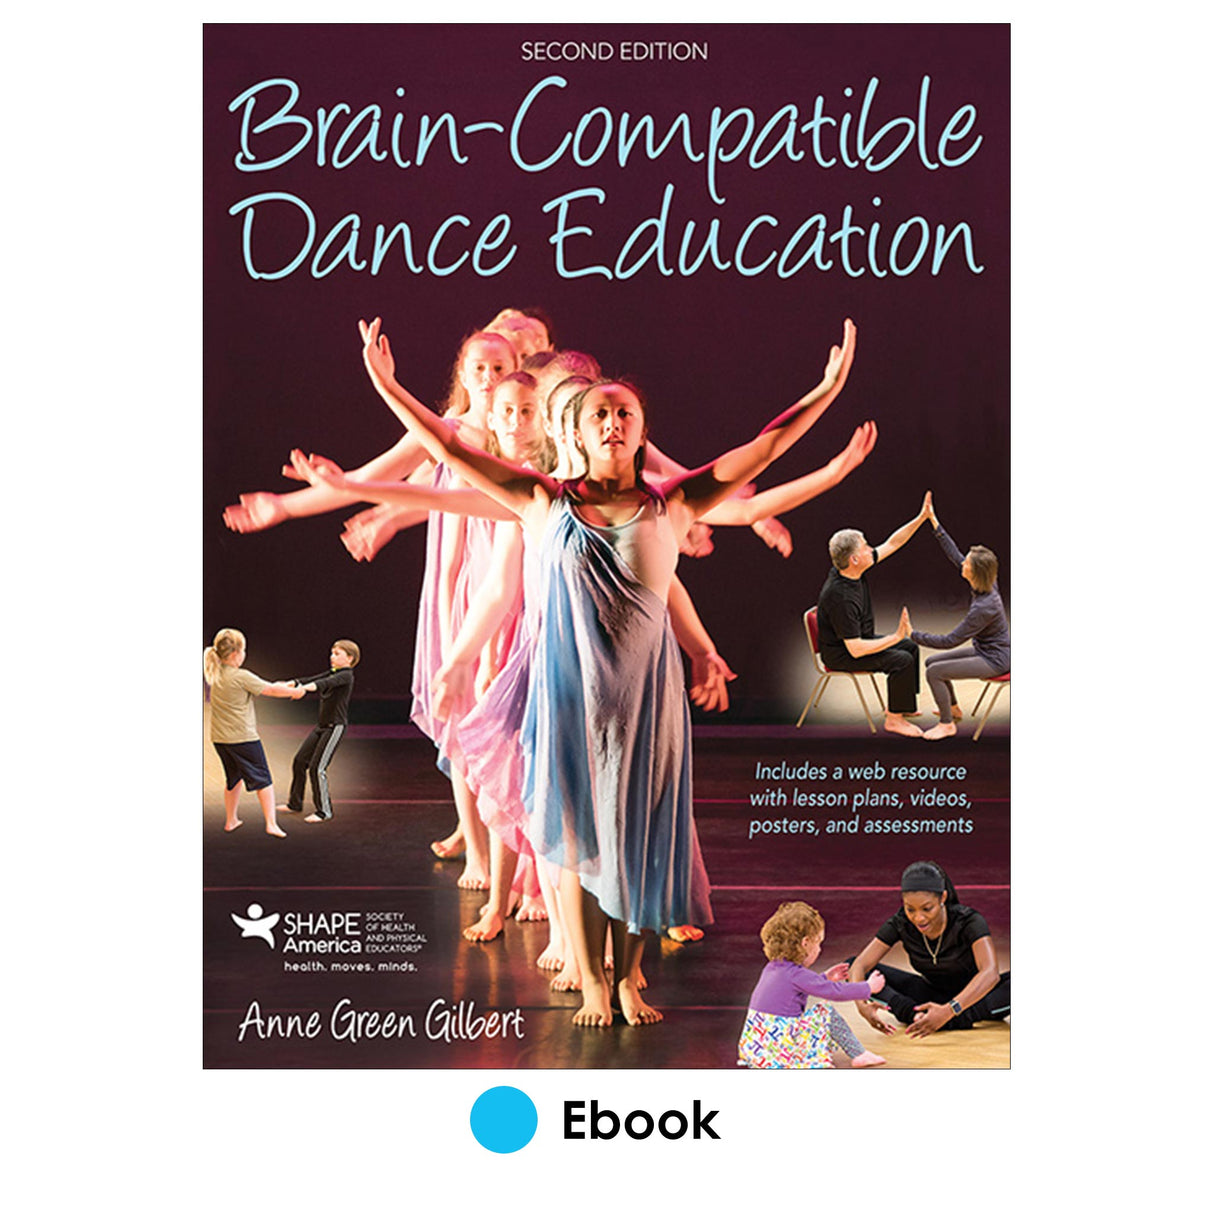 Brain-Compatible Dance Education 2nd Edition epub With Web Resource